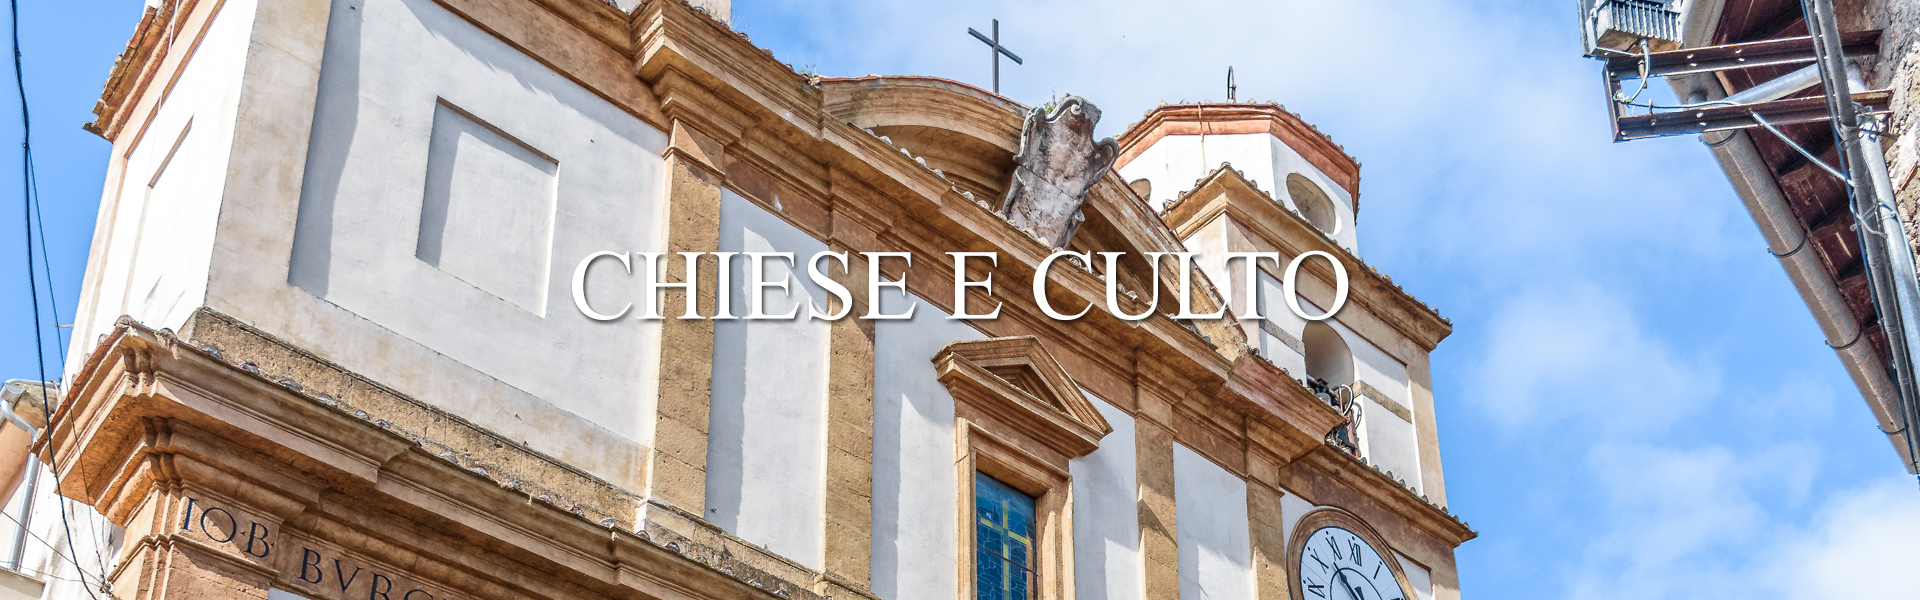 chiese-culto-1920x600